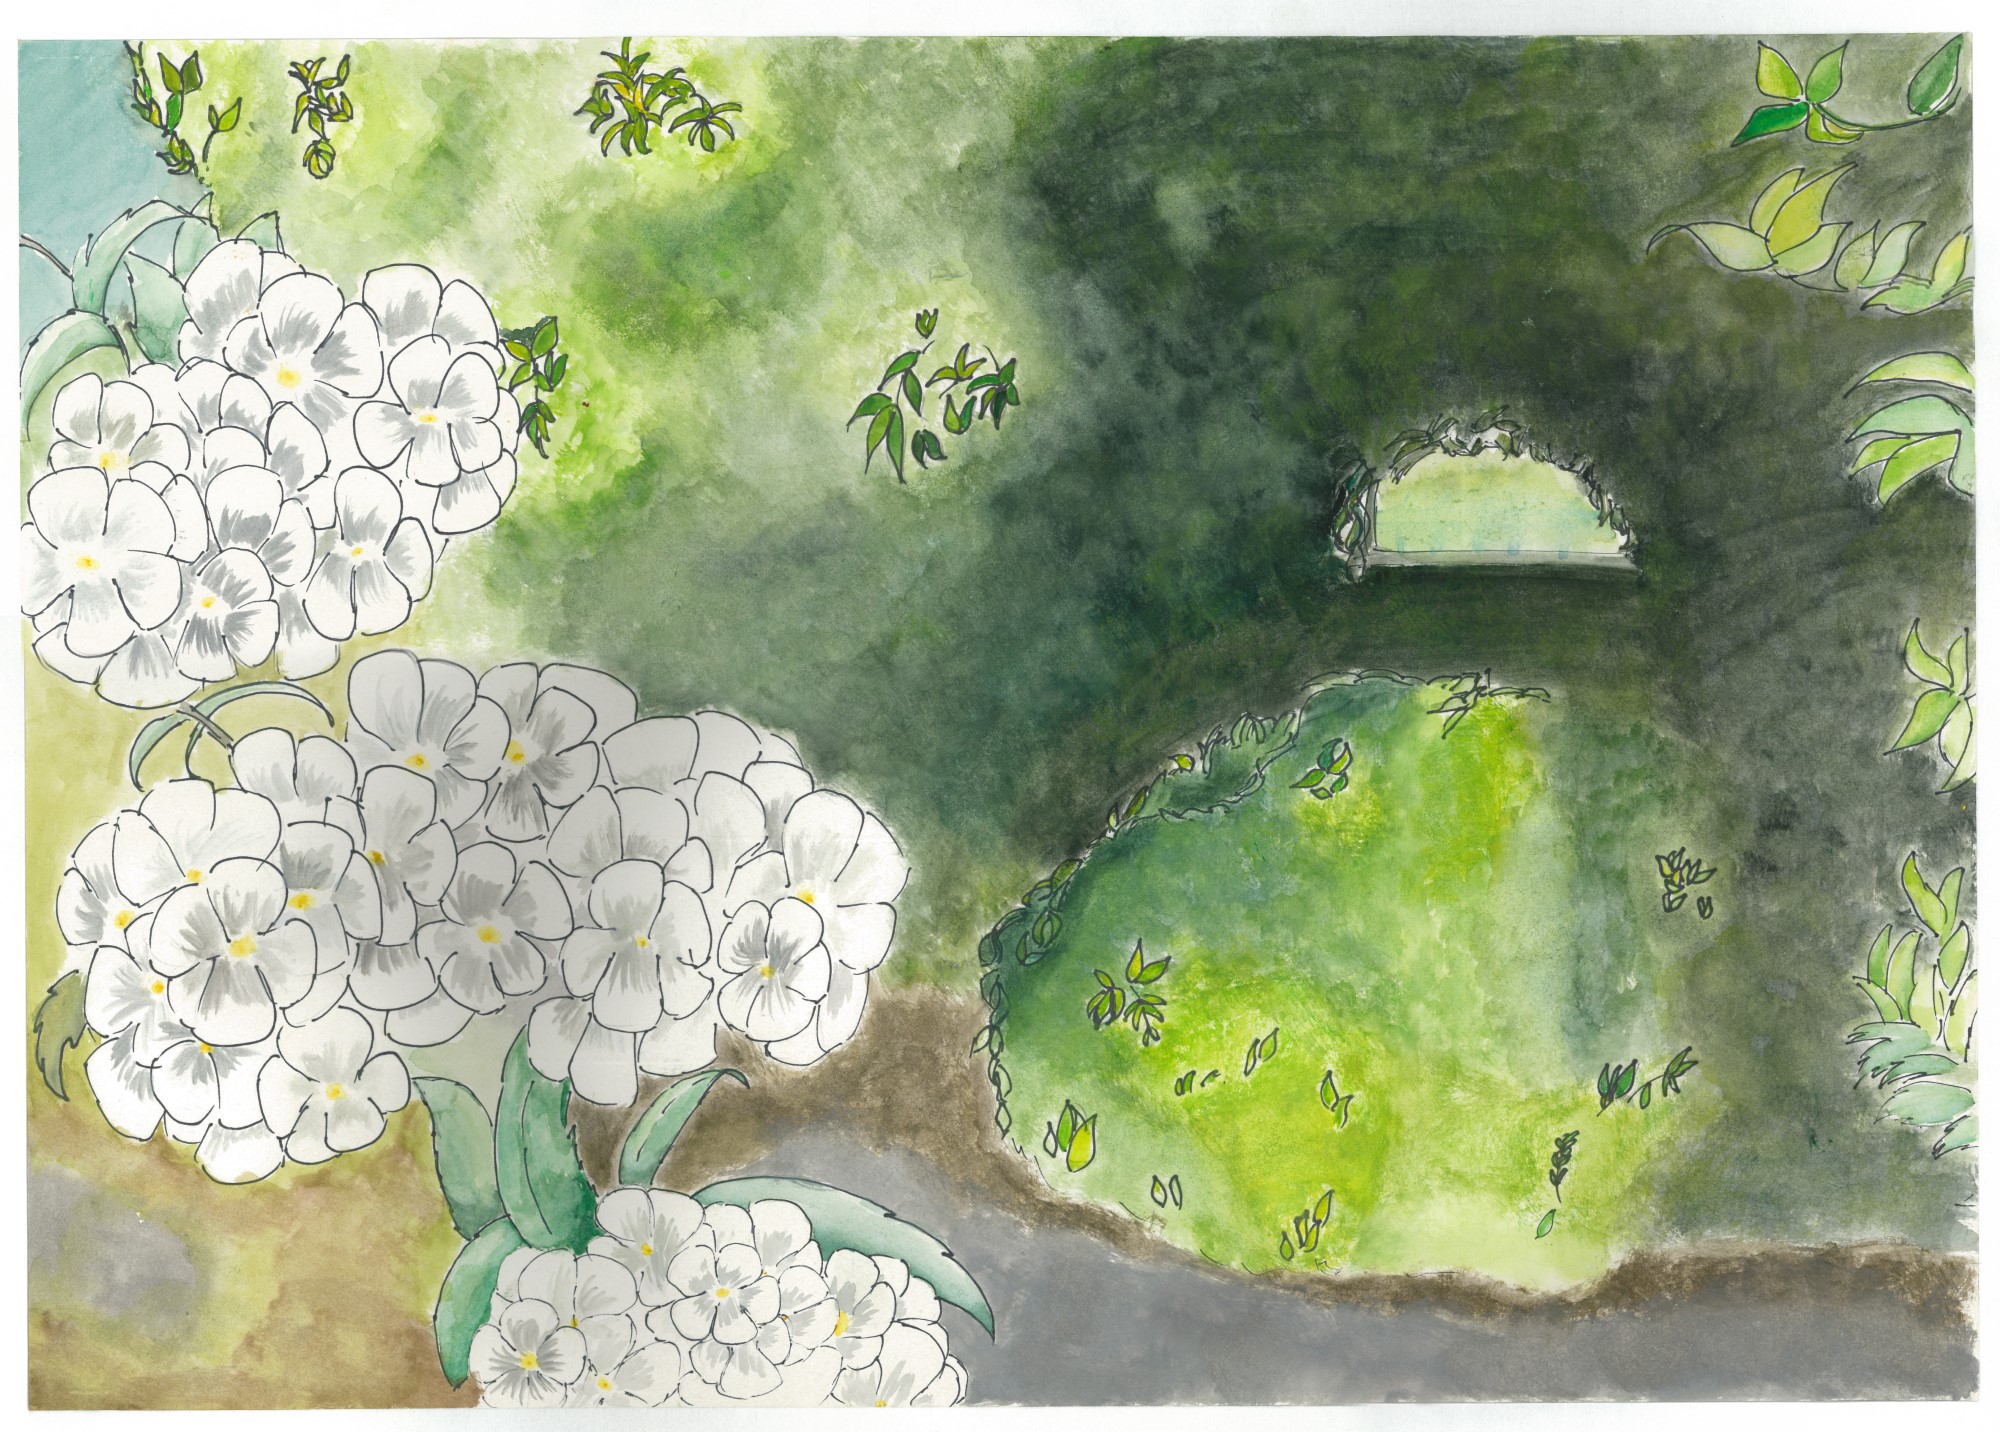 student artwork - many small white flowers